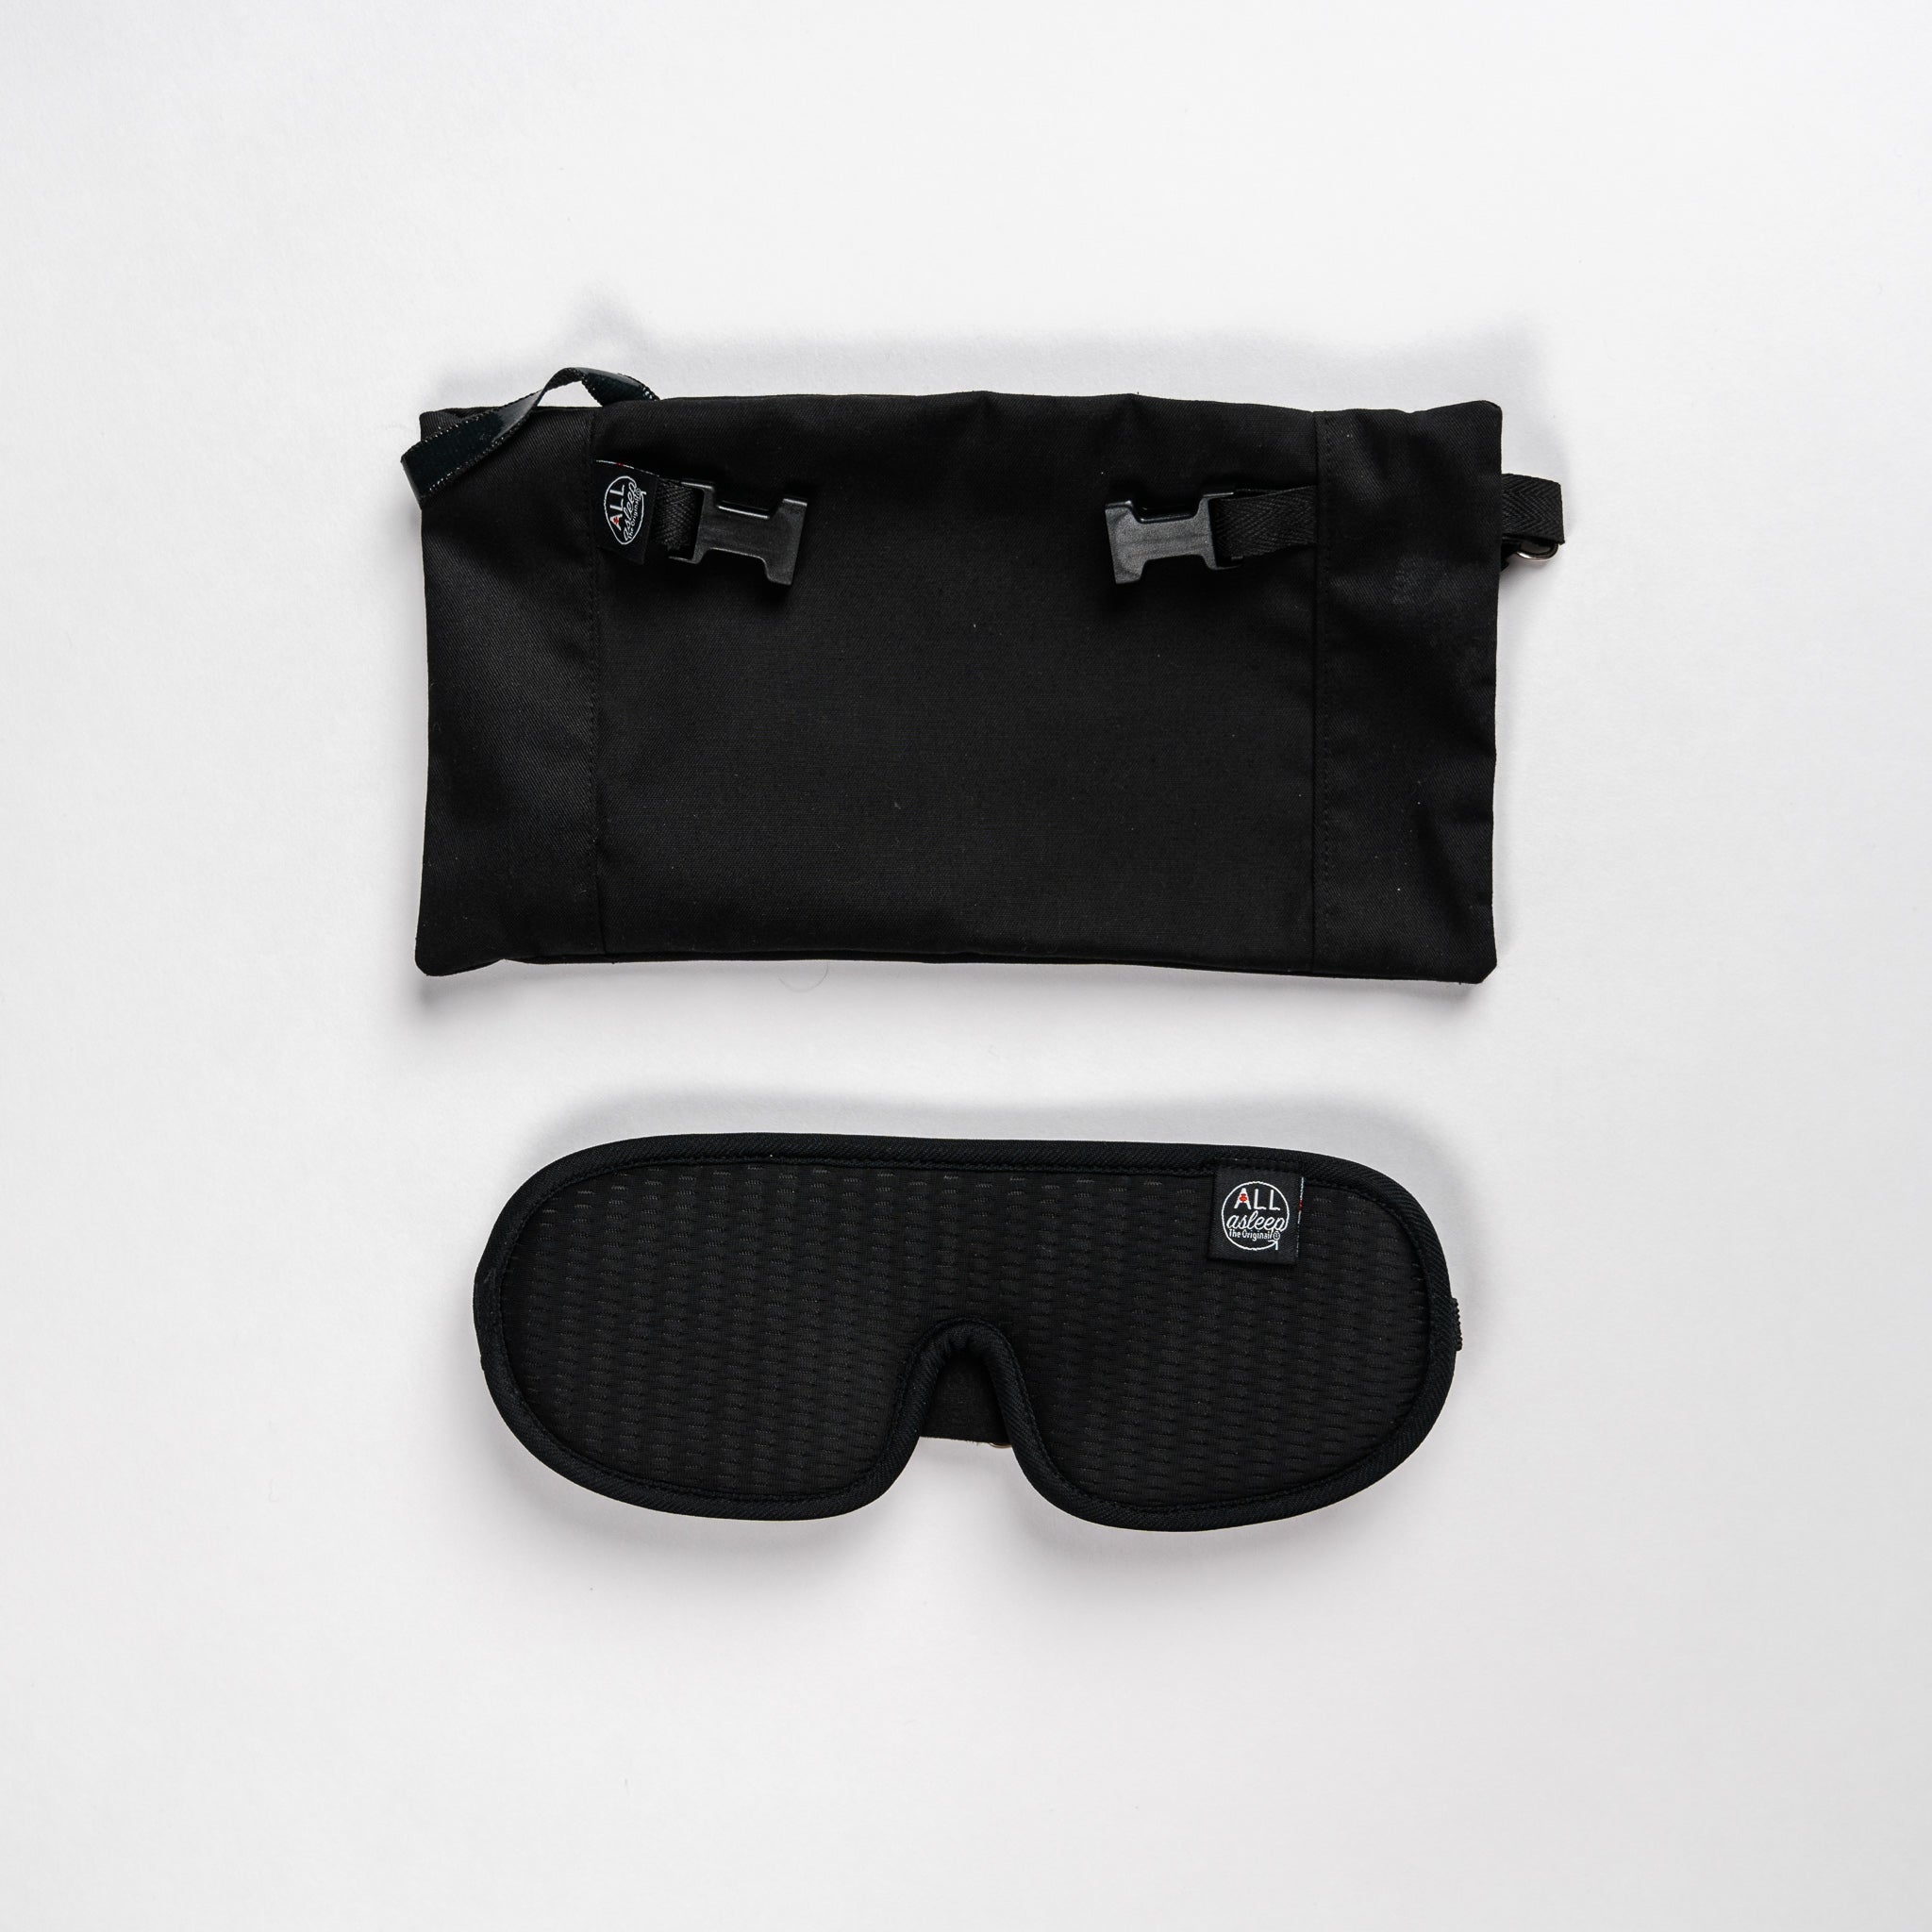 Top view of the headrest pouch and eye mask  of the ALLasleep travel accessory